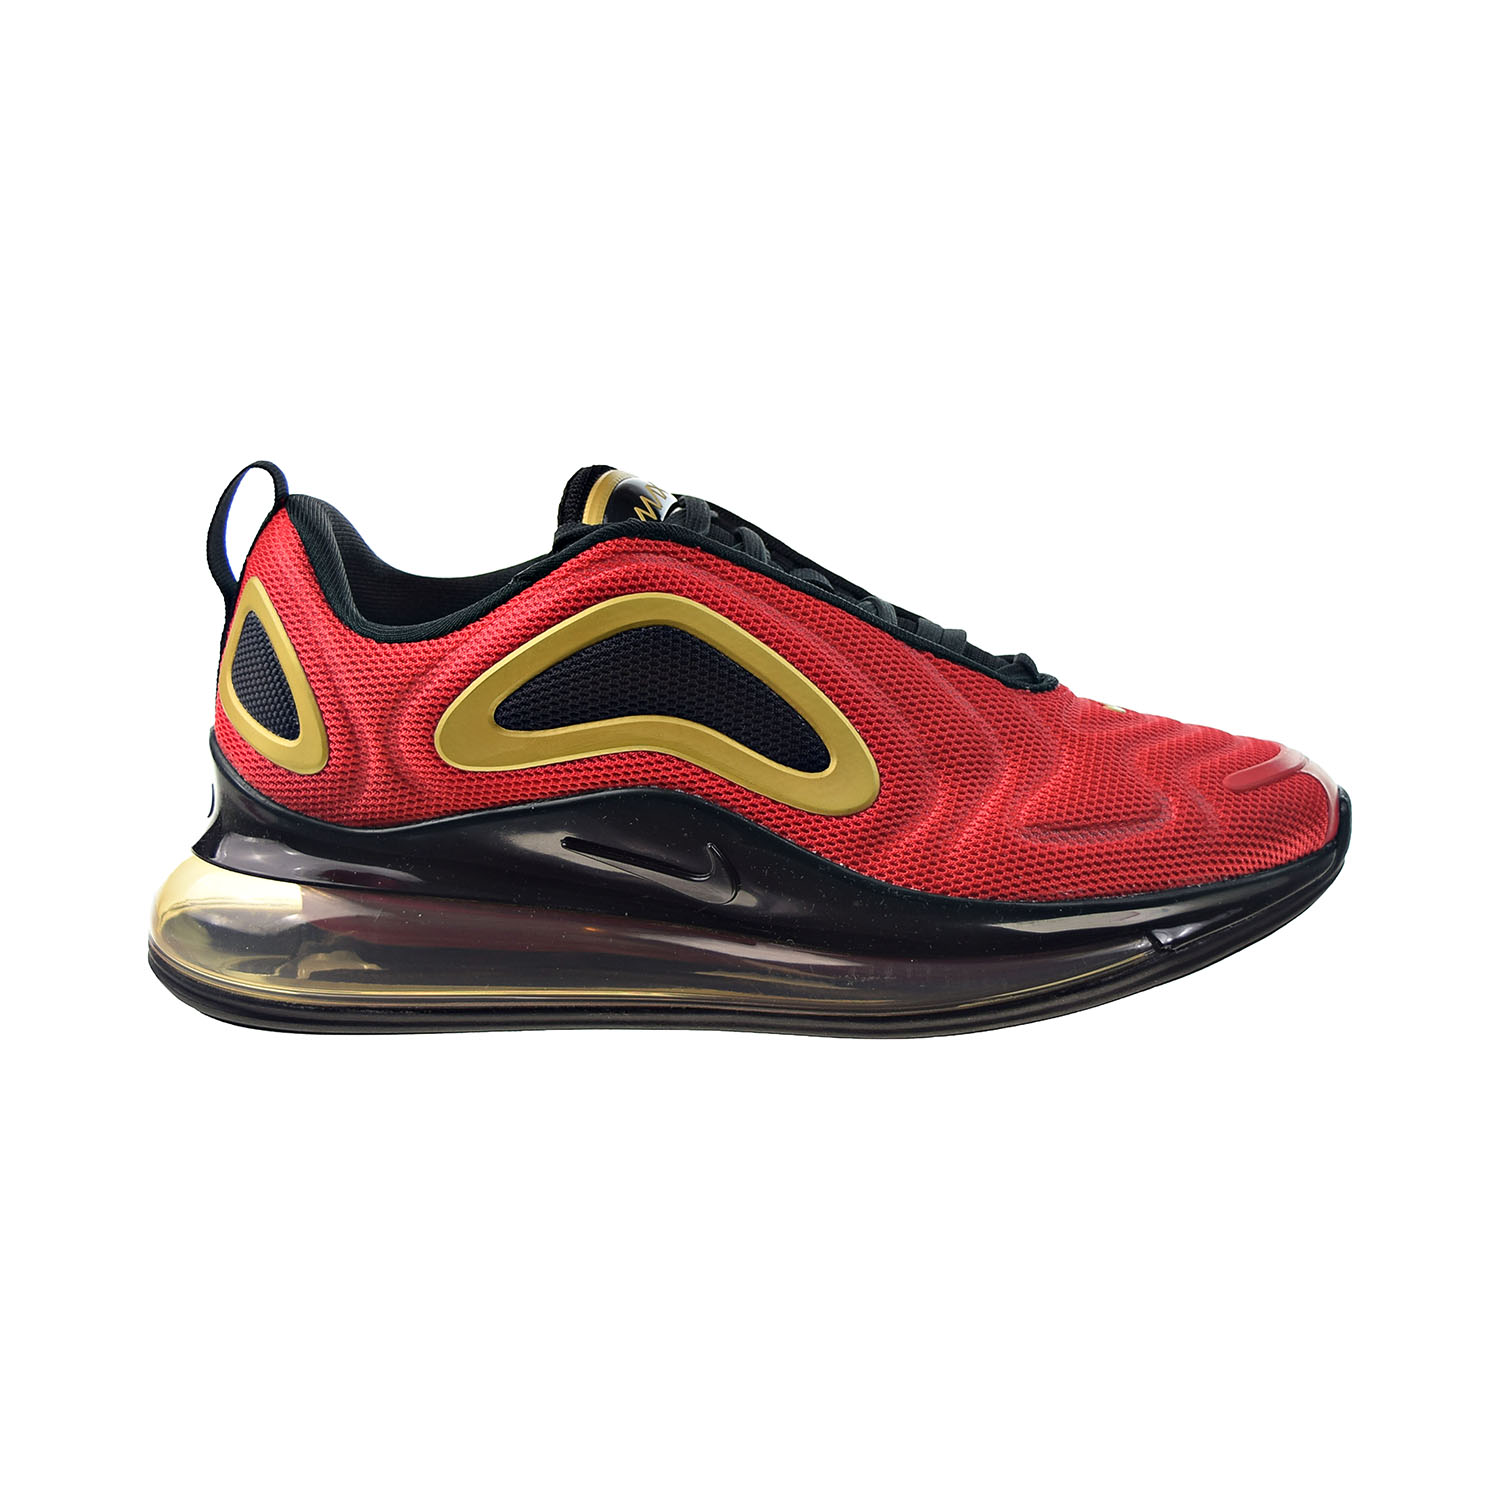 Nike Air Max 720 Women's Shoes University Red-Black cu4871-600 - image 1 of 6